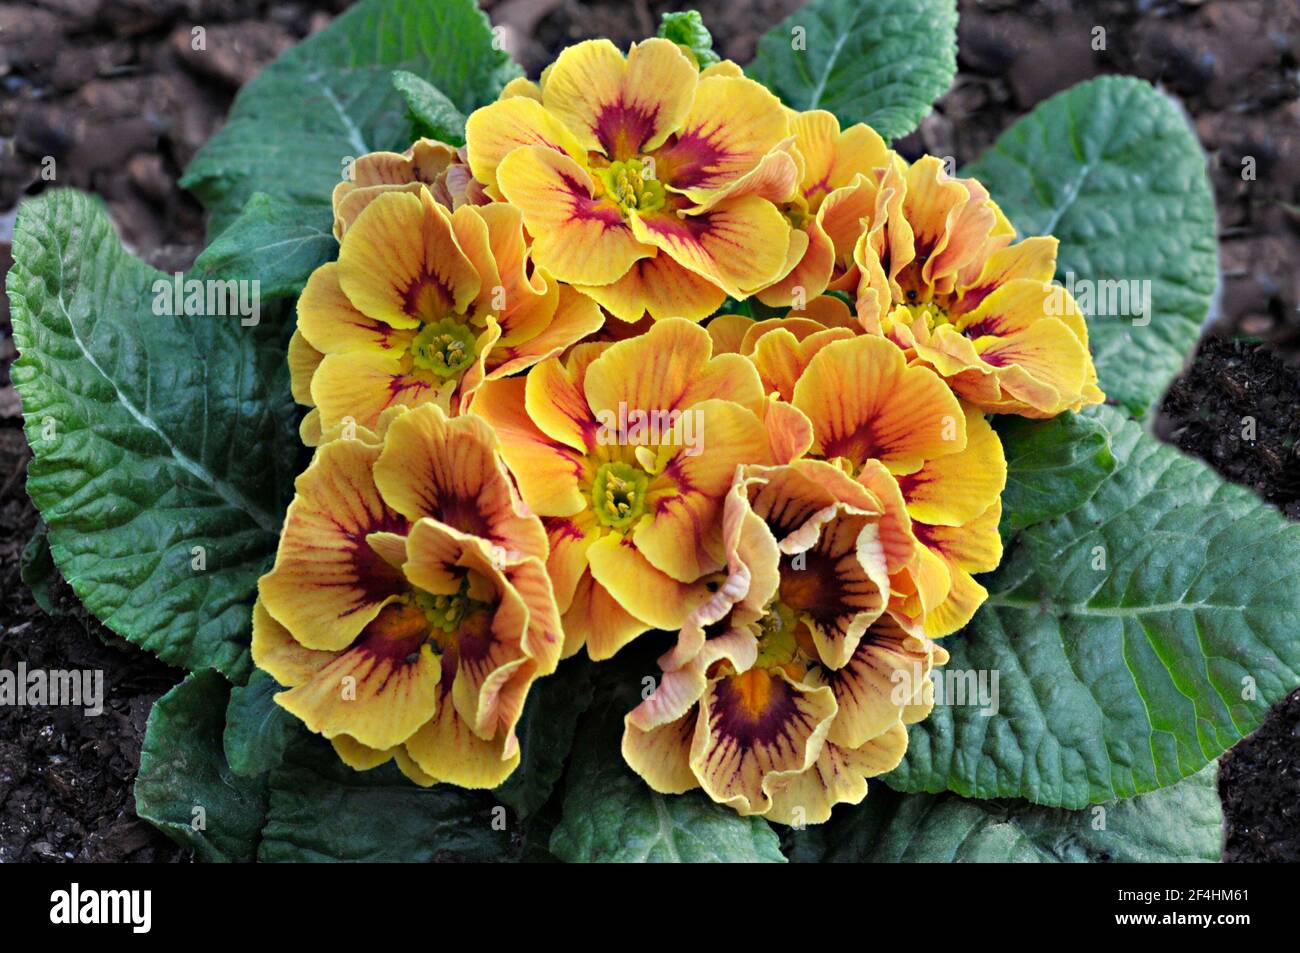 Close up of primula Marietta with rosette of leaves around flowers a bi colour F1 Polyanthus that is a yellow and red spring flowering hardy perennial Stock Photo